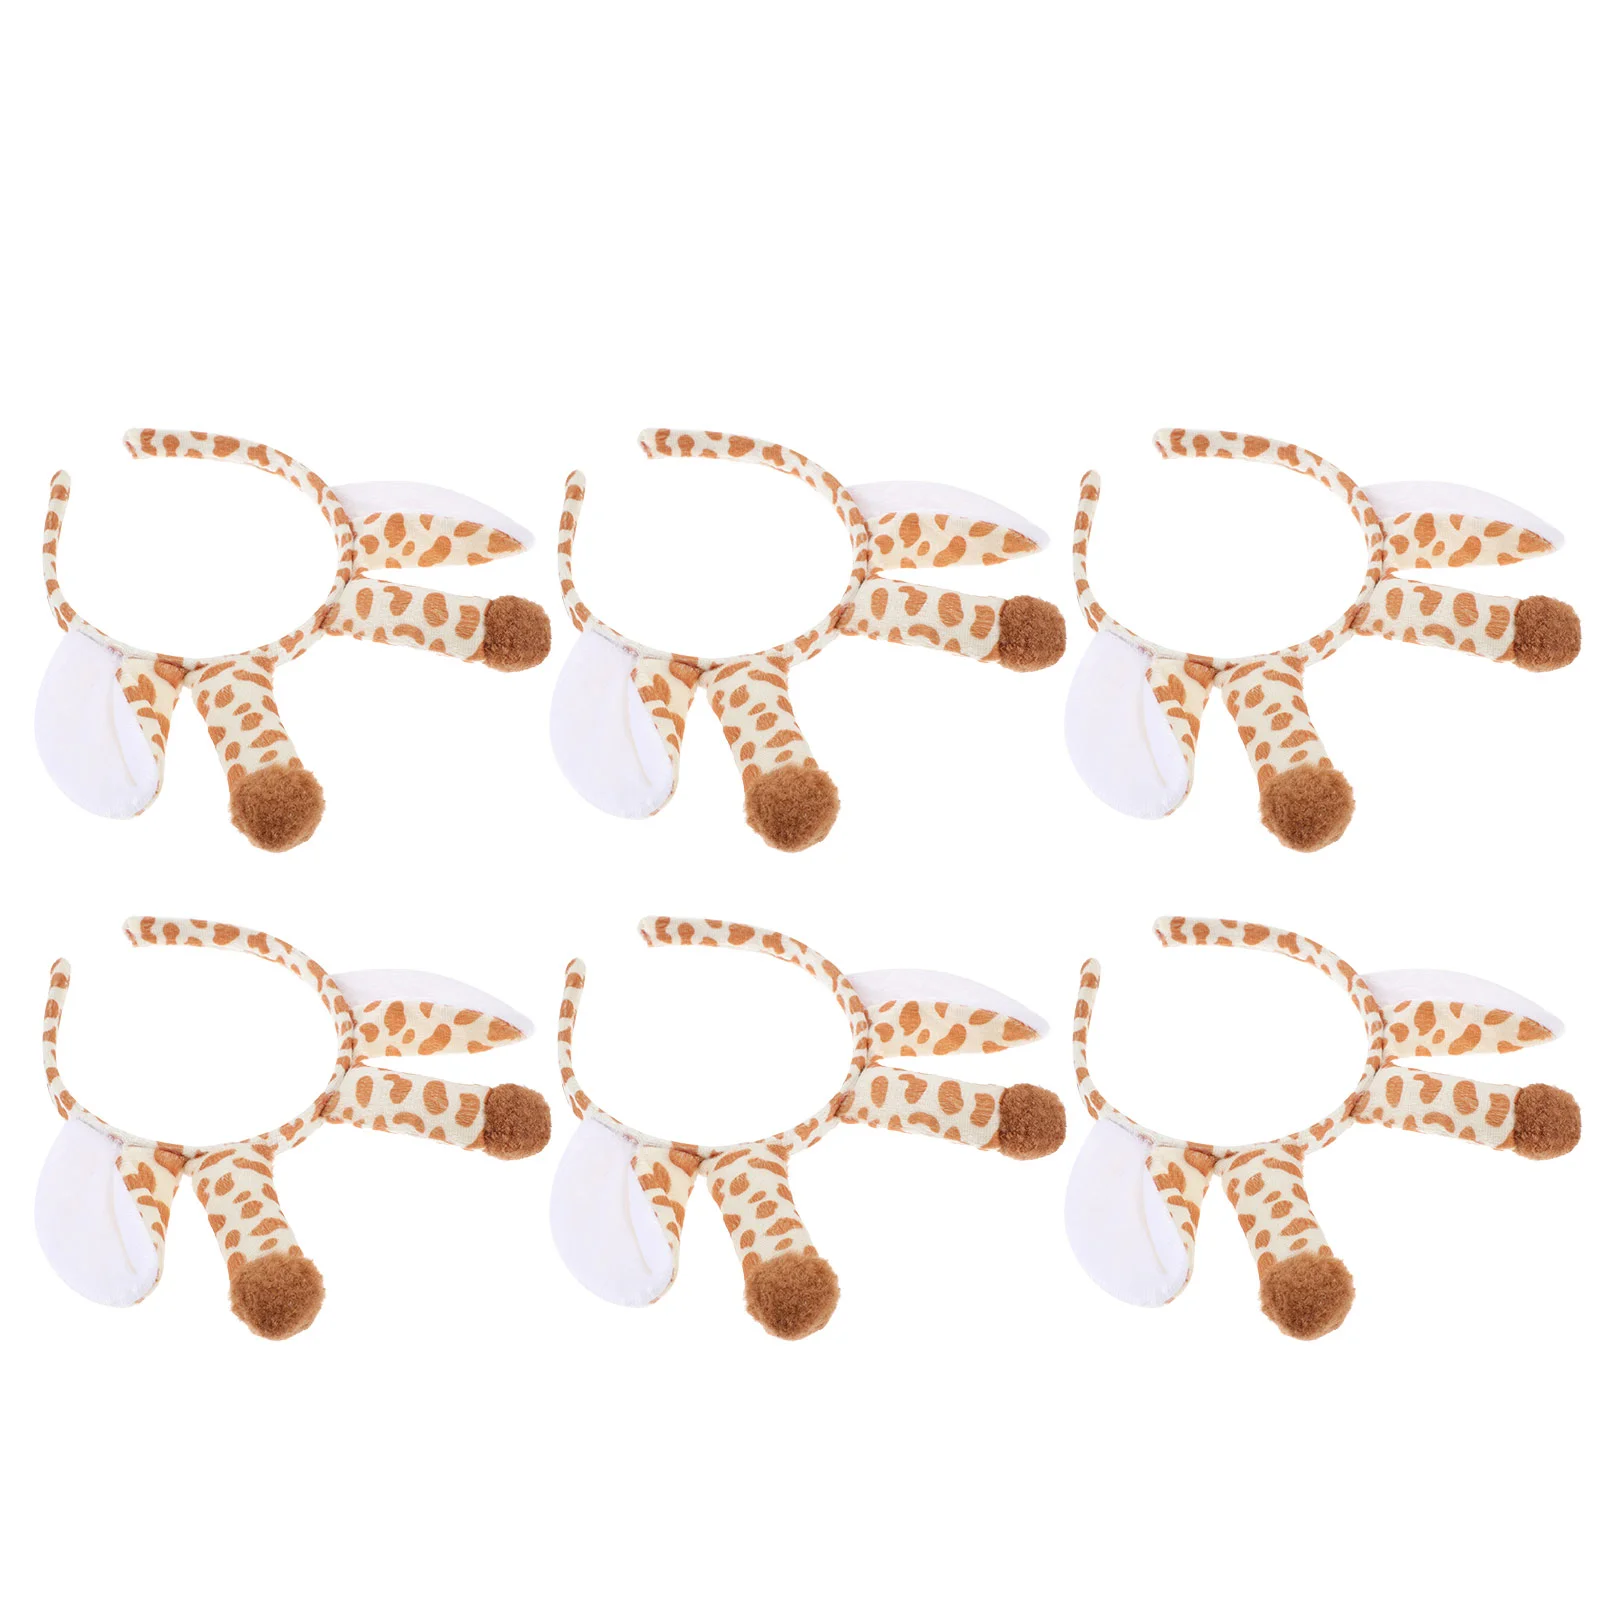 6 Pcs Animal Headband Lovely Hair Wear Decorate Christmas Party Hoops Accessories Girls Headdress Cloth for Kids Miss